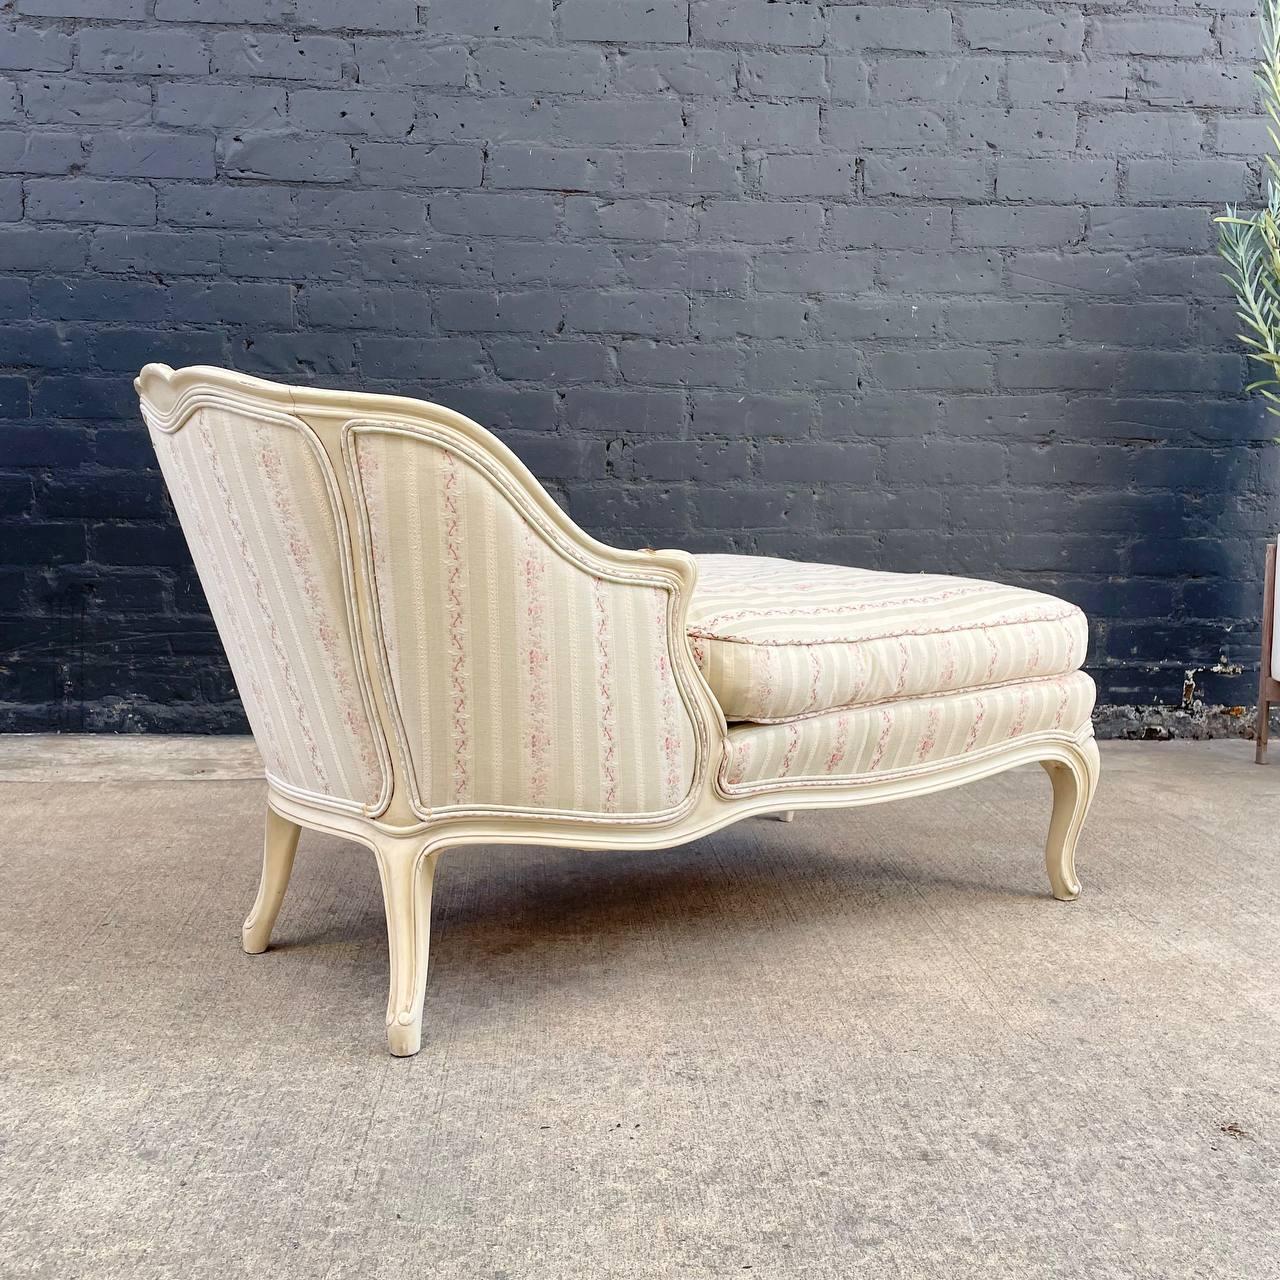 Vintage French Provincial Style Chaise Lounge Chair In Good Condition For Sale In Los Angeles, CA